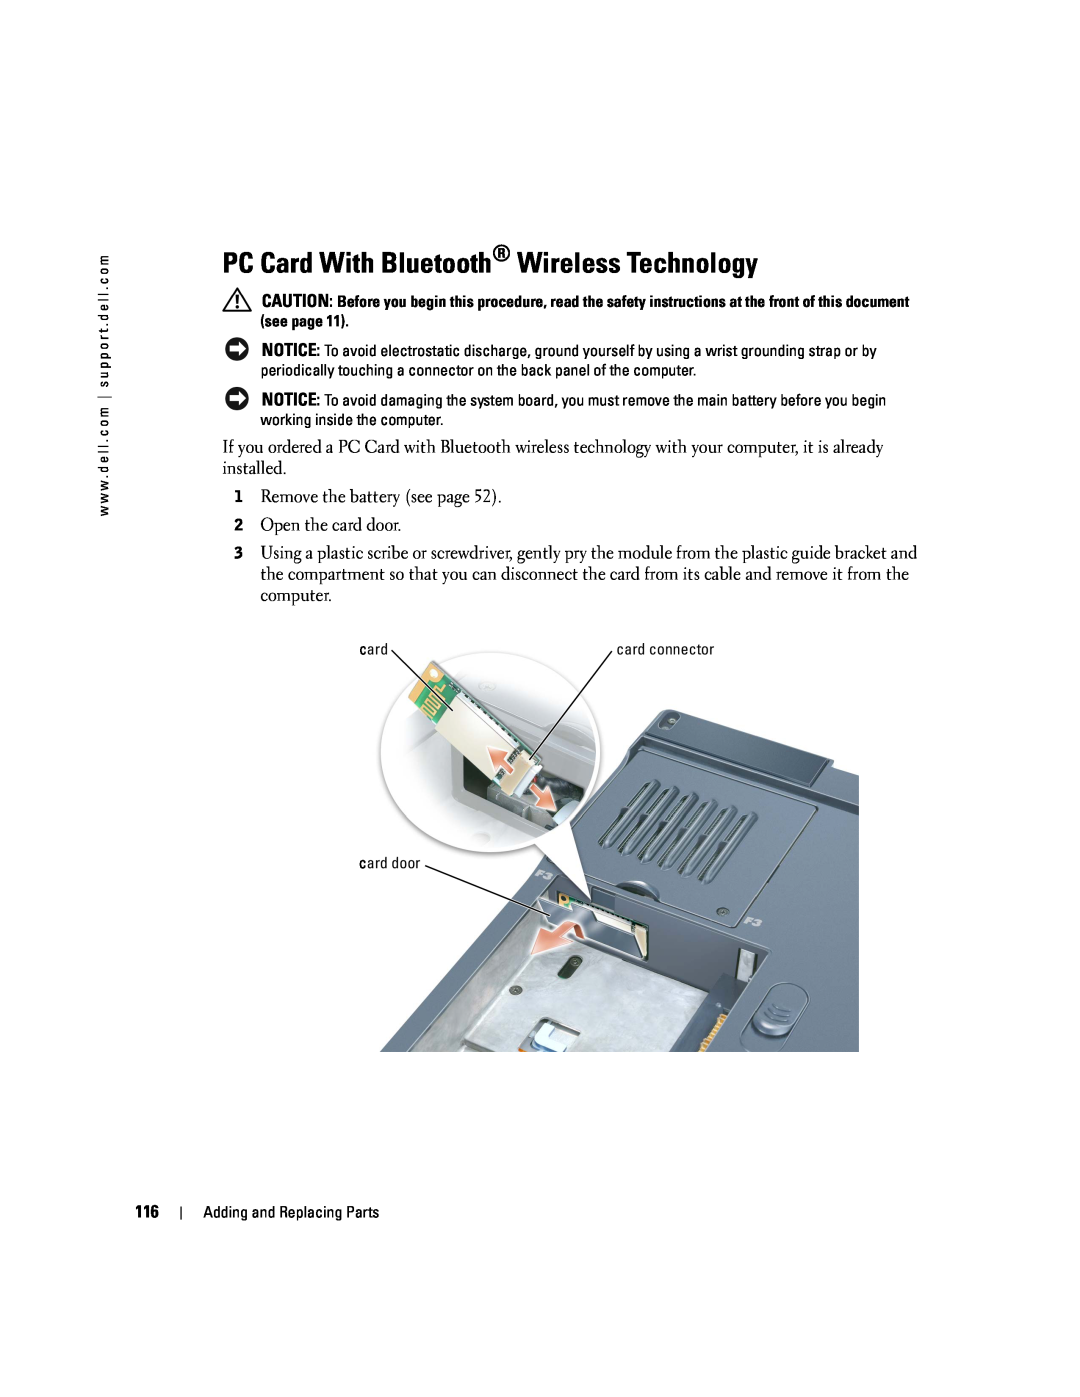 Dell PP09L owner manual PC Card With Bluetooth Wireless Technology 